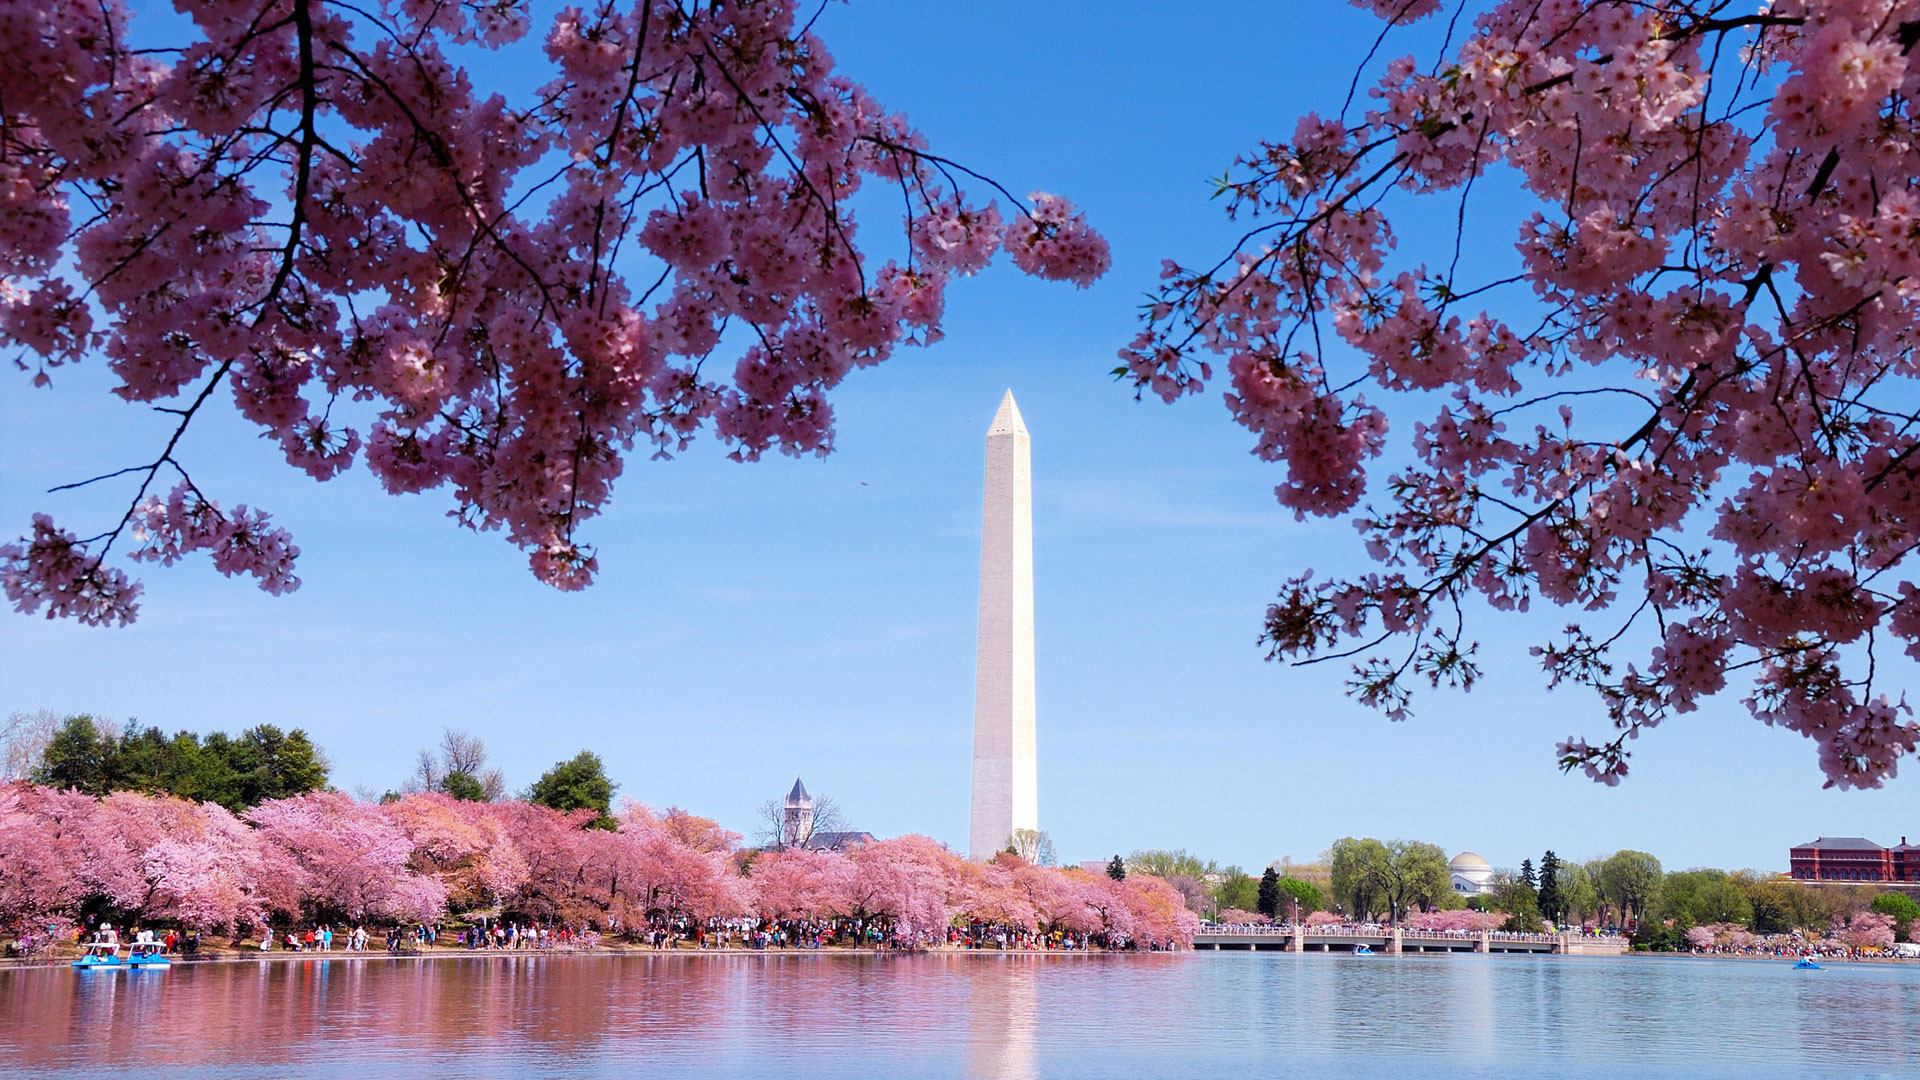 1920x1080 Best Places To Have a Date in Washington, D.C.